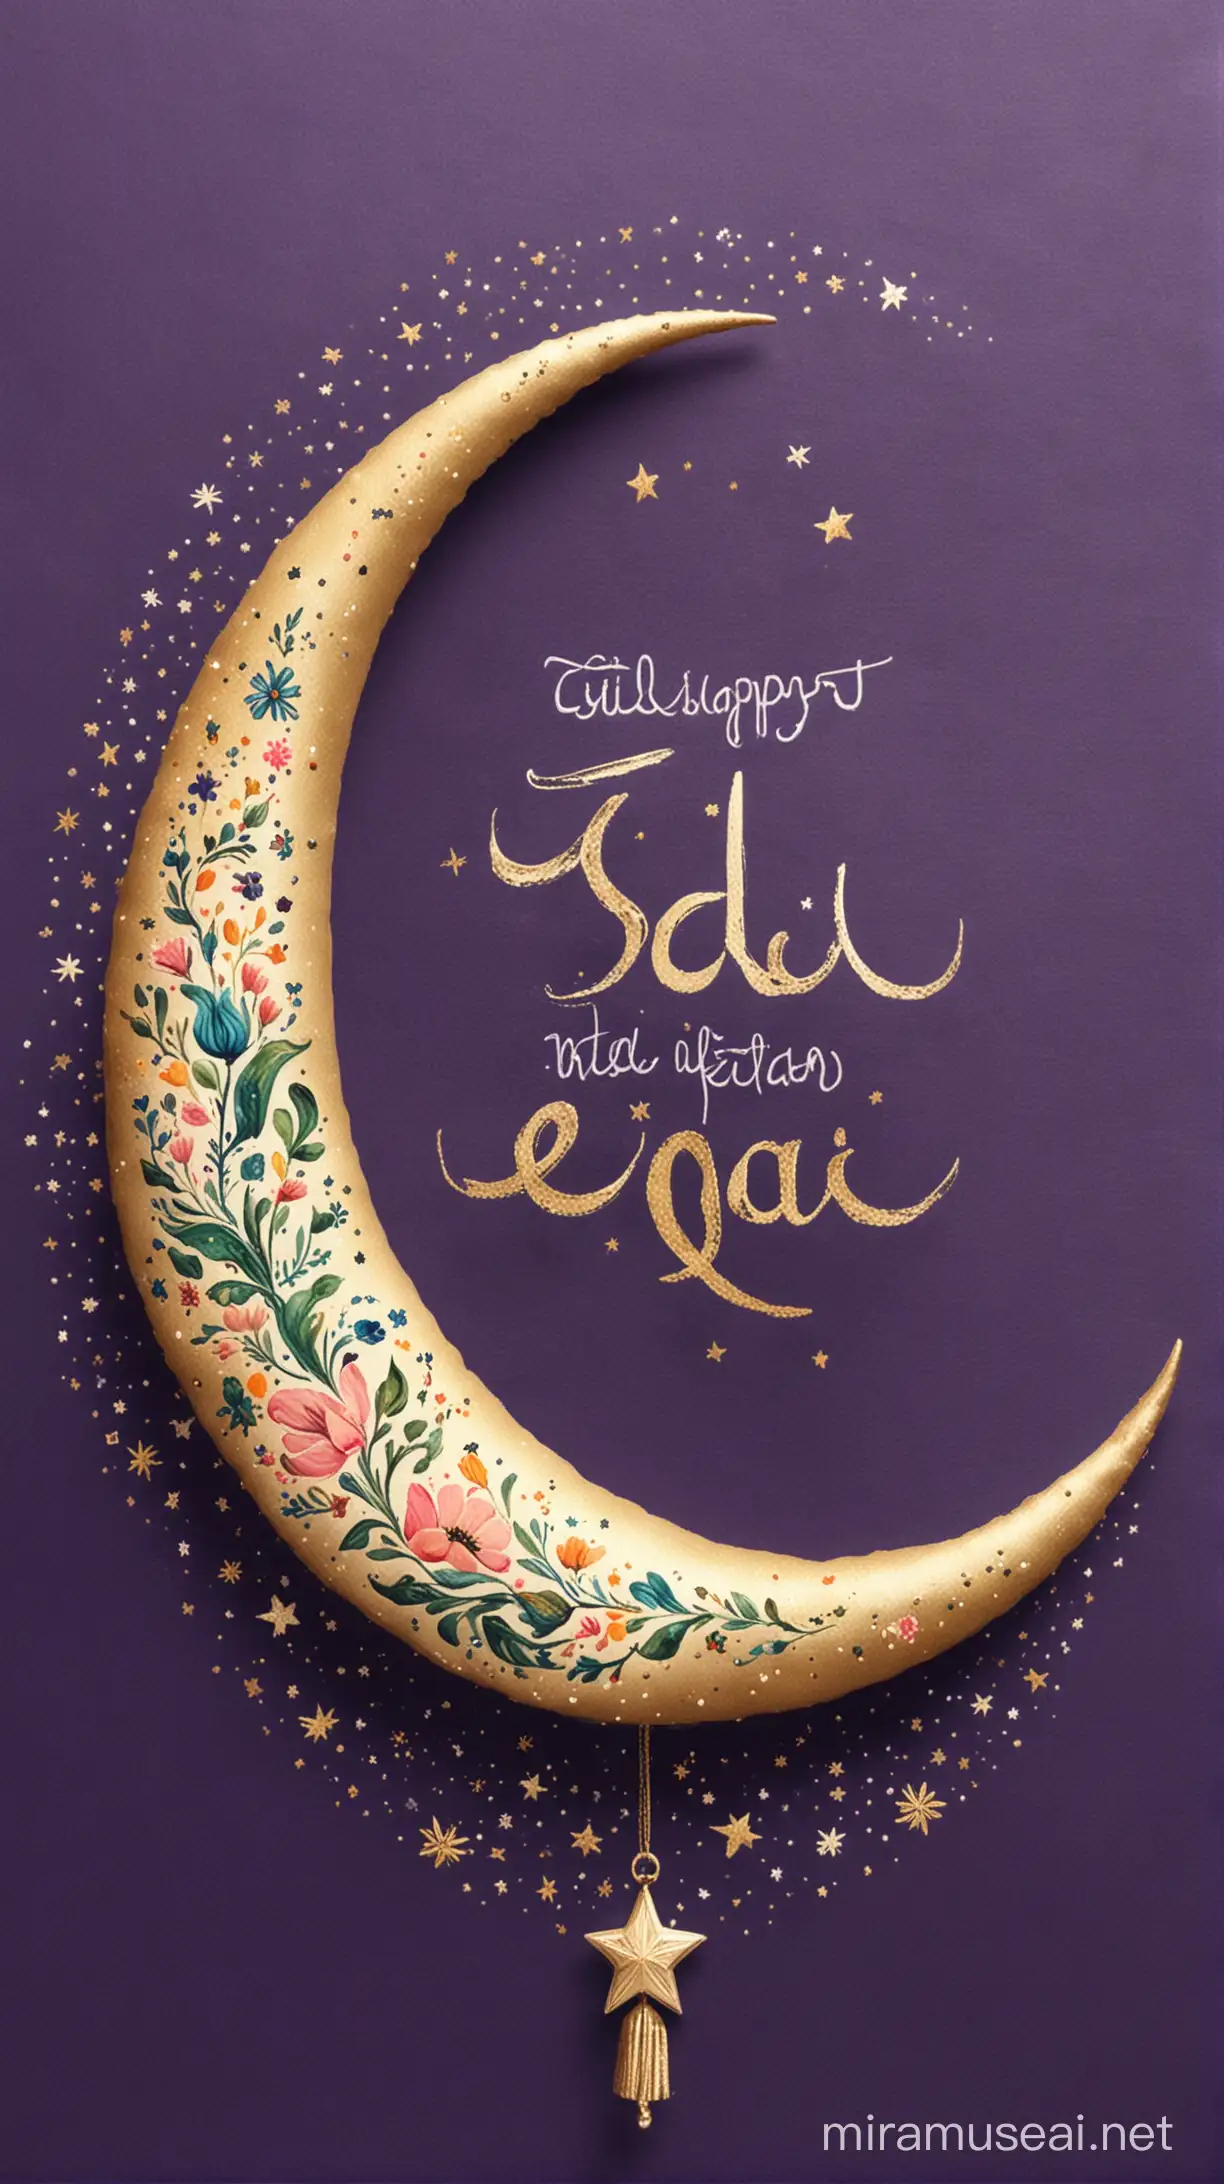 Hand Painted Crescent Moon for Eid Greetings